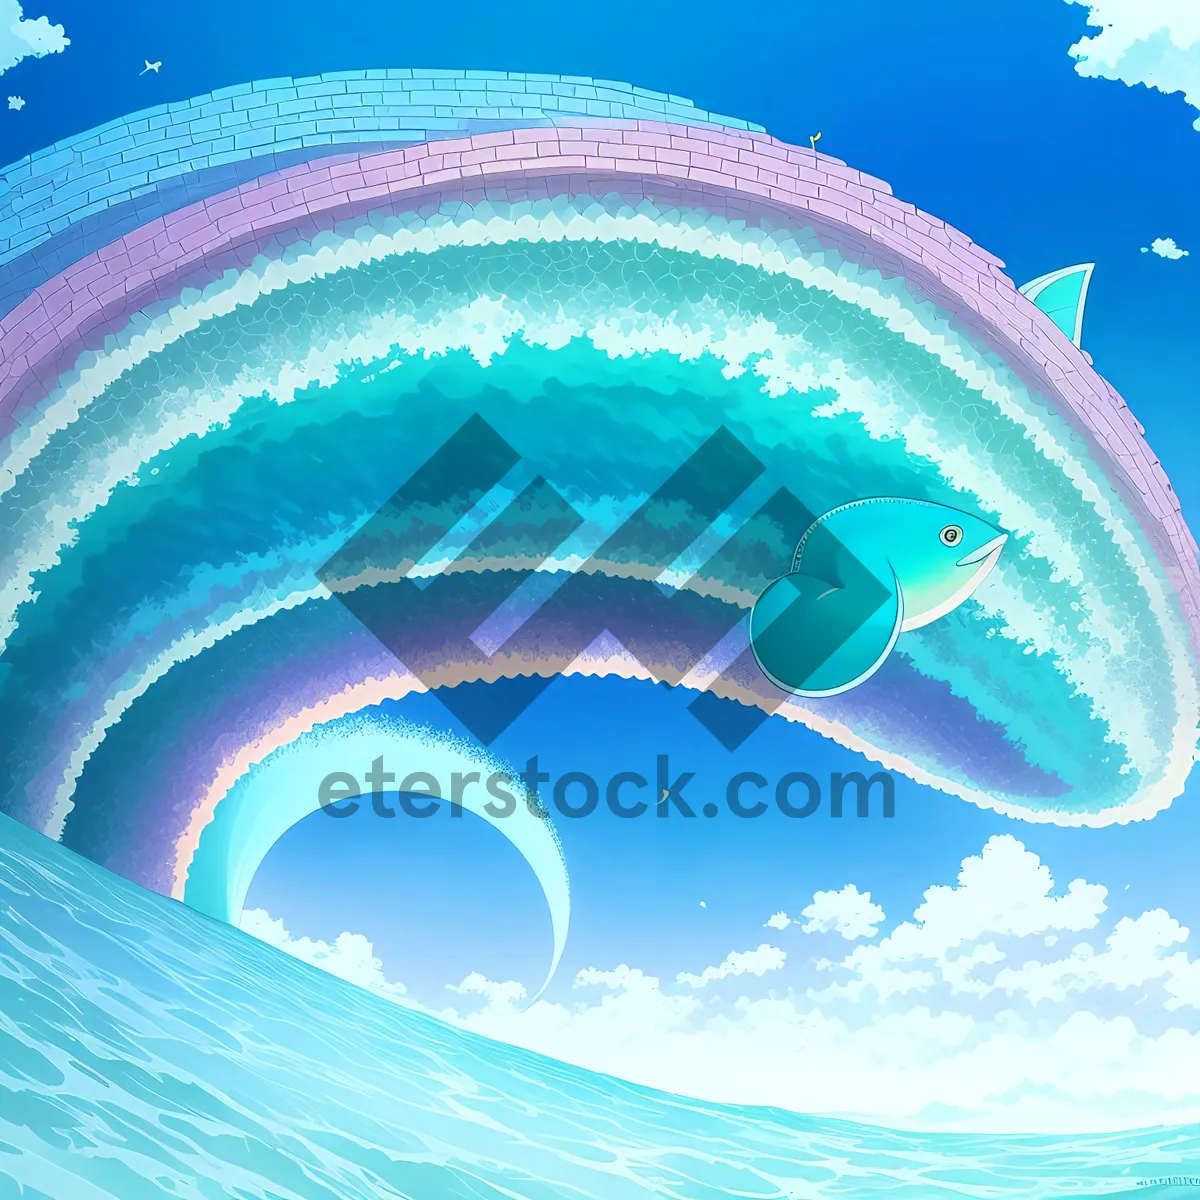 Picture of Serene surfer riding majestic ocean wave.